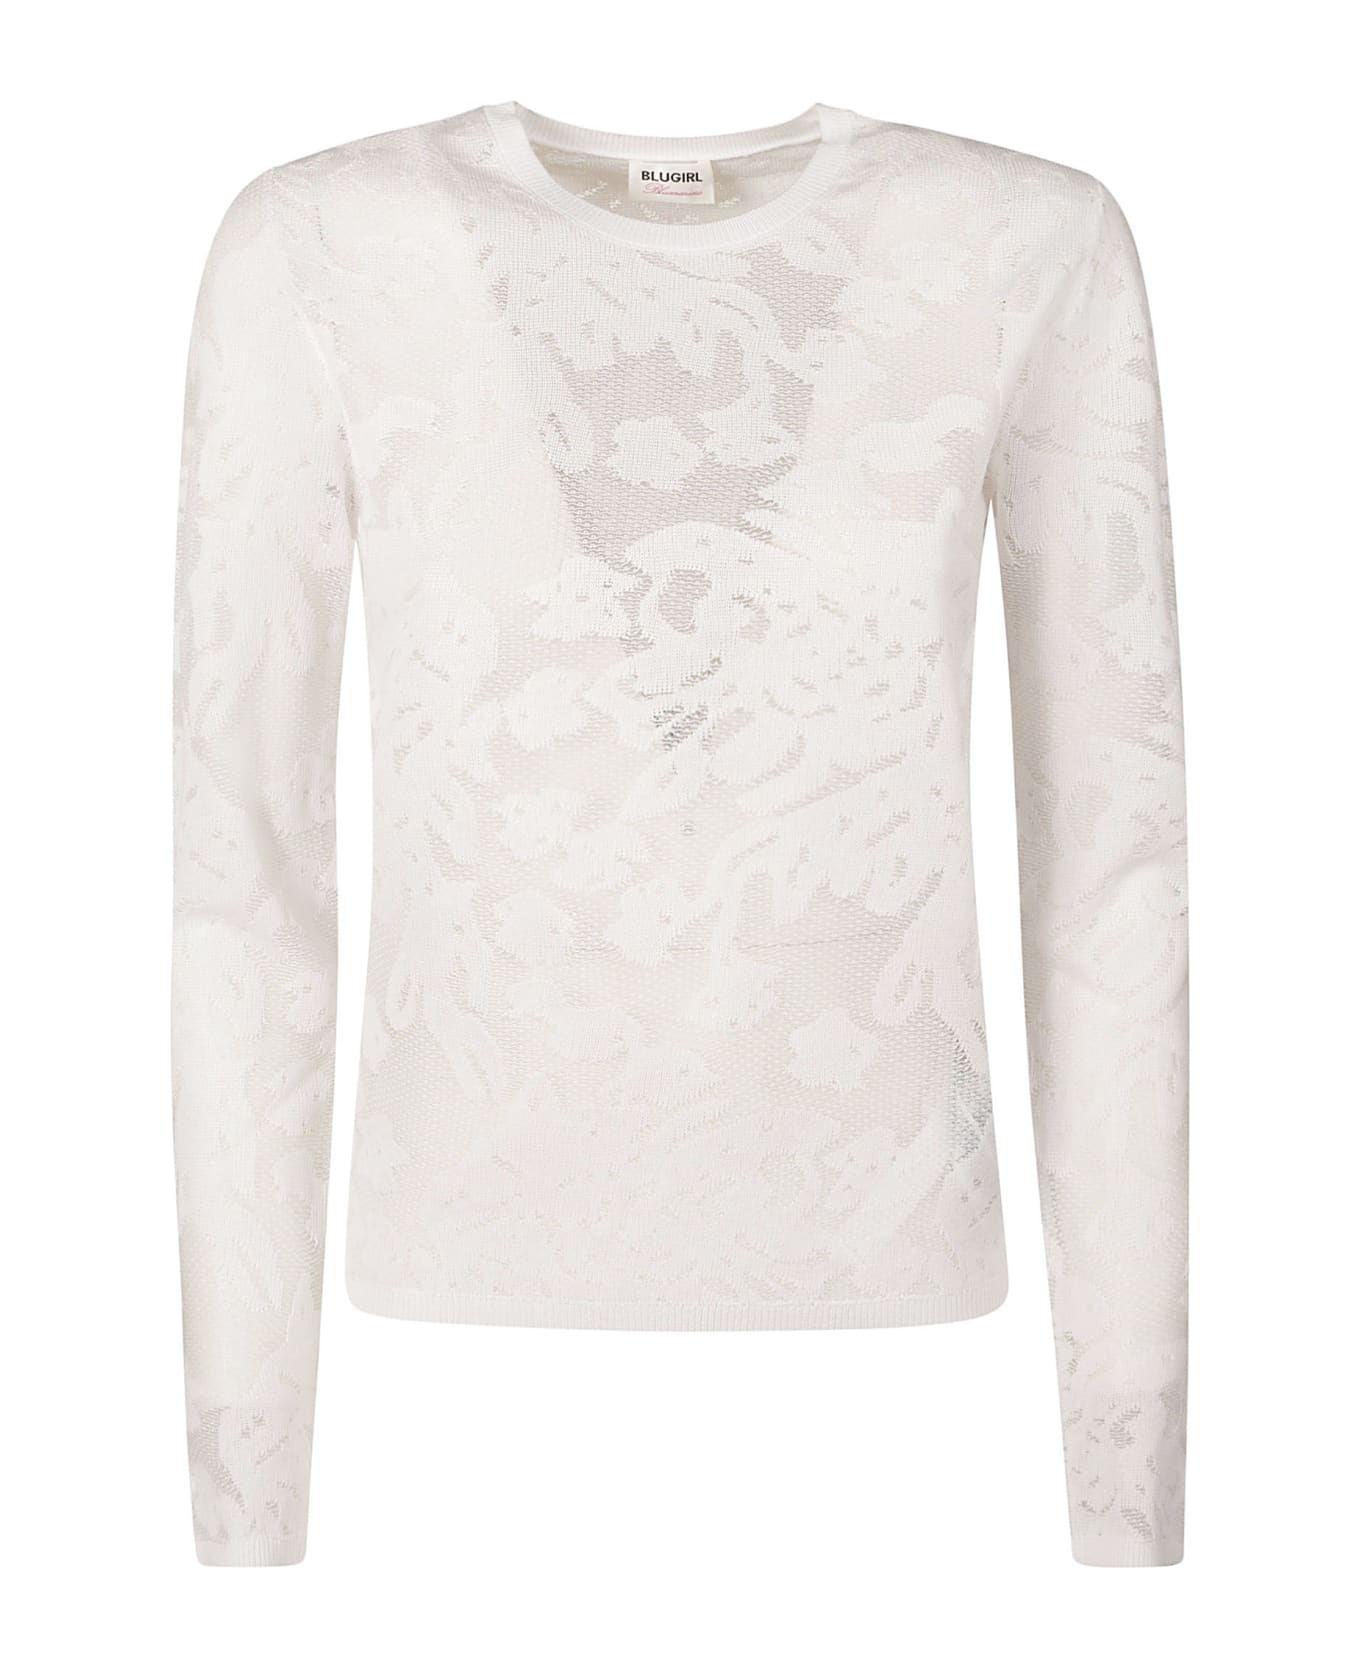 Blugirl Long-sleeved Floral Lace Top - Bianco